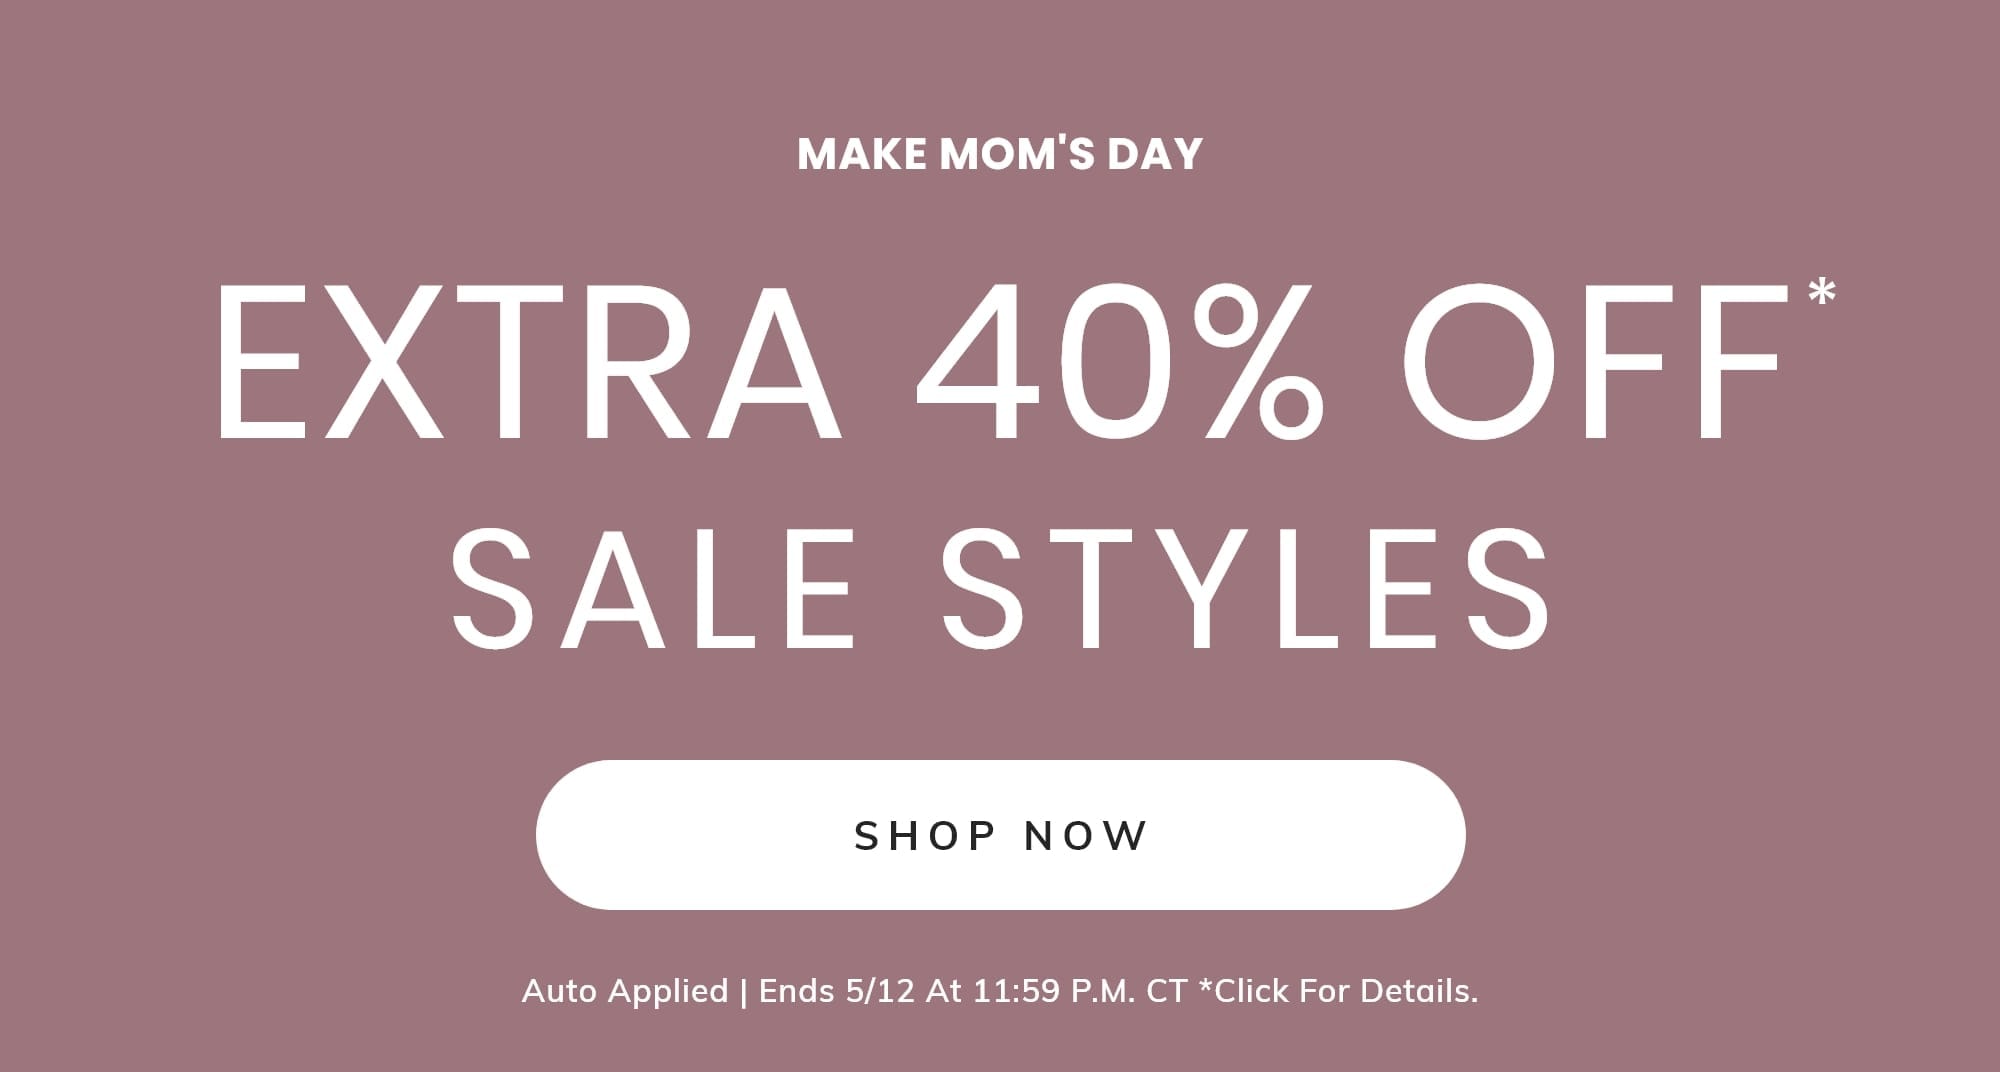 EXTRA 40% OFF* SALE STYLES